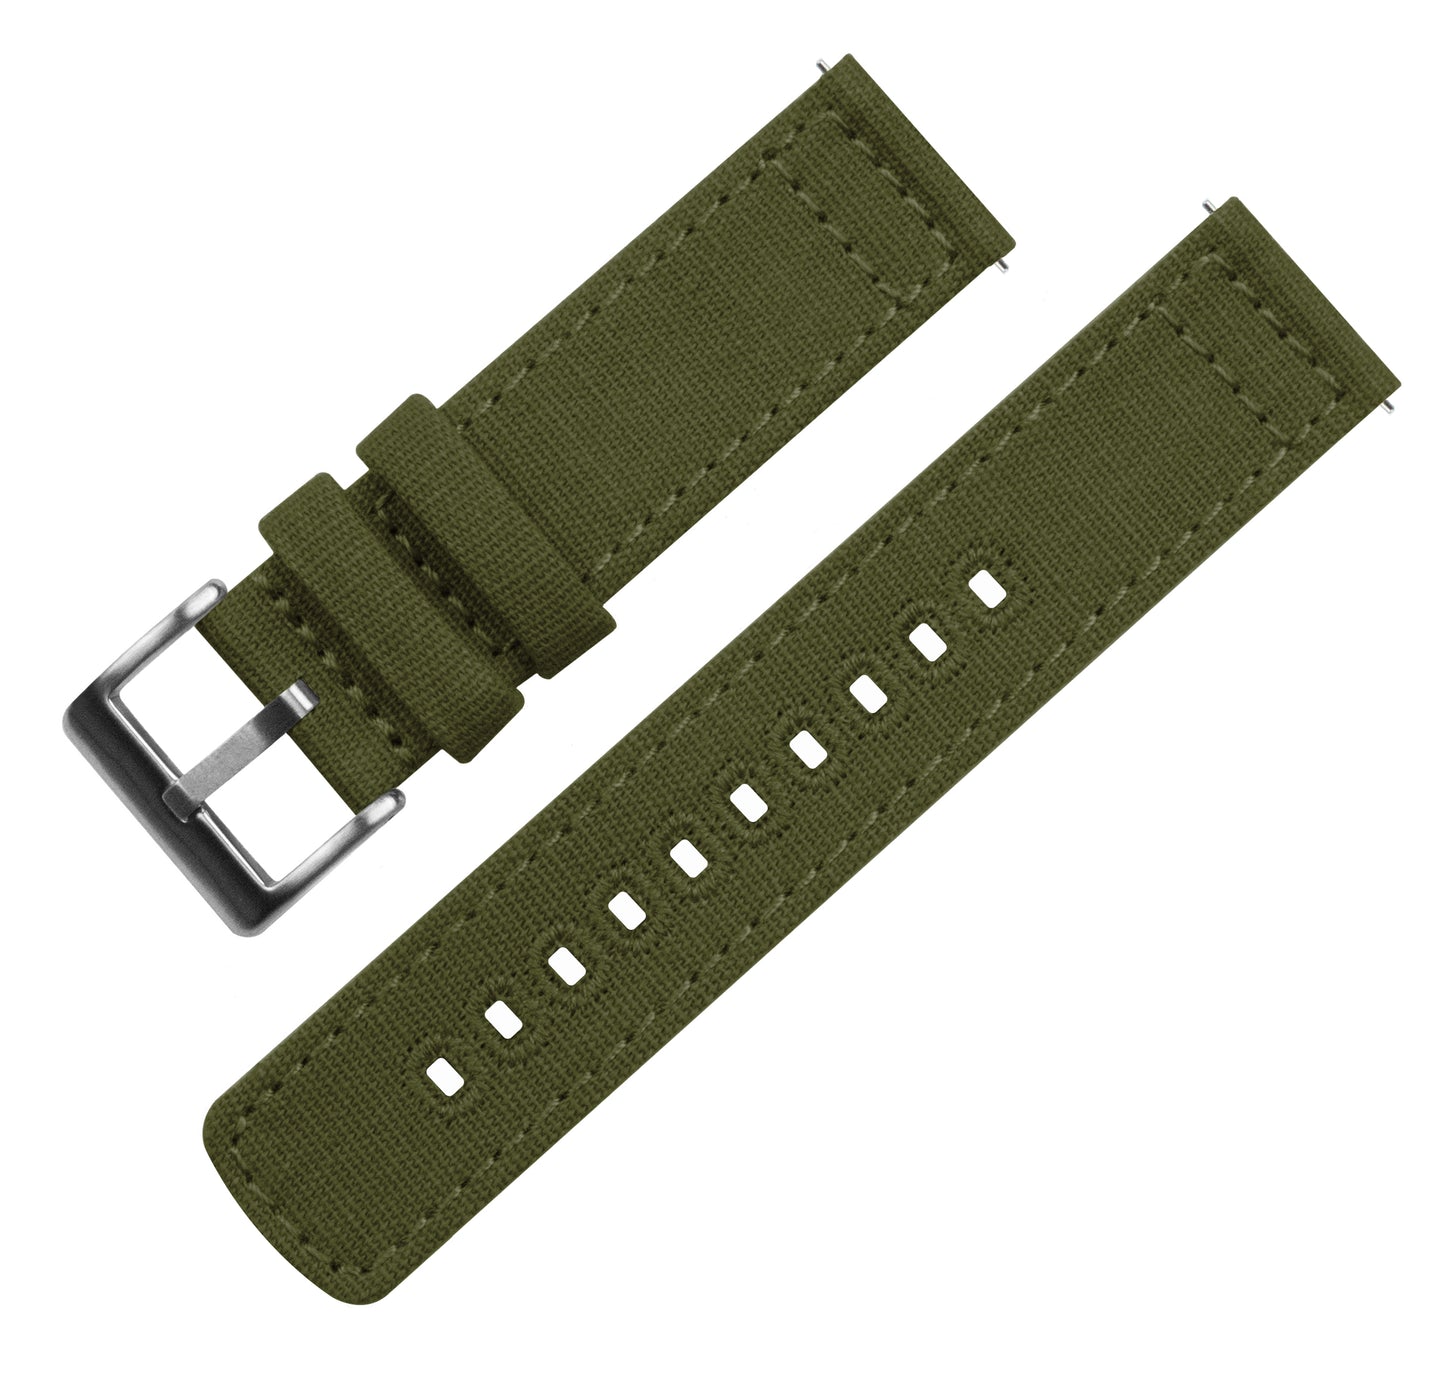 Timex Weekender Expedition Watches Army Green Canvas Watch Band